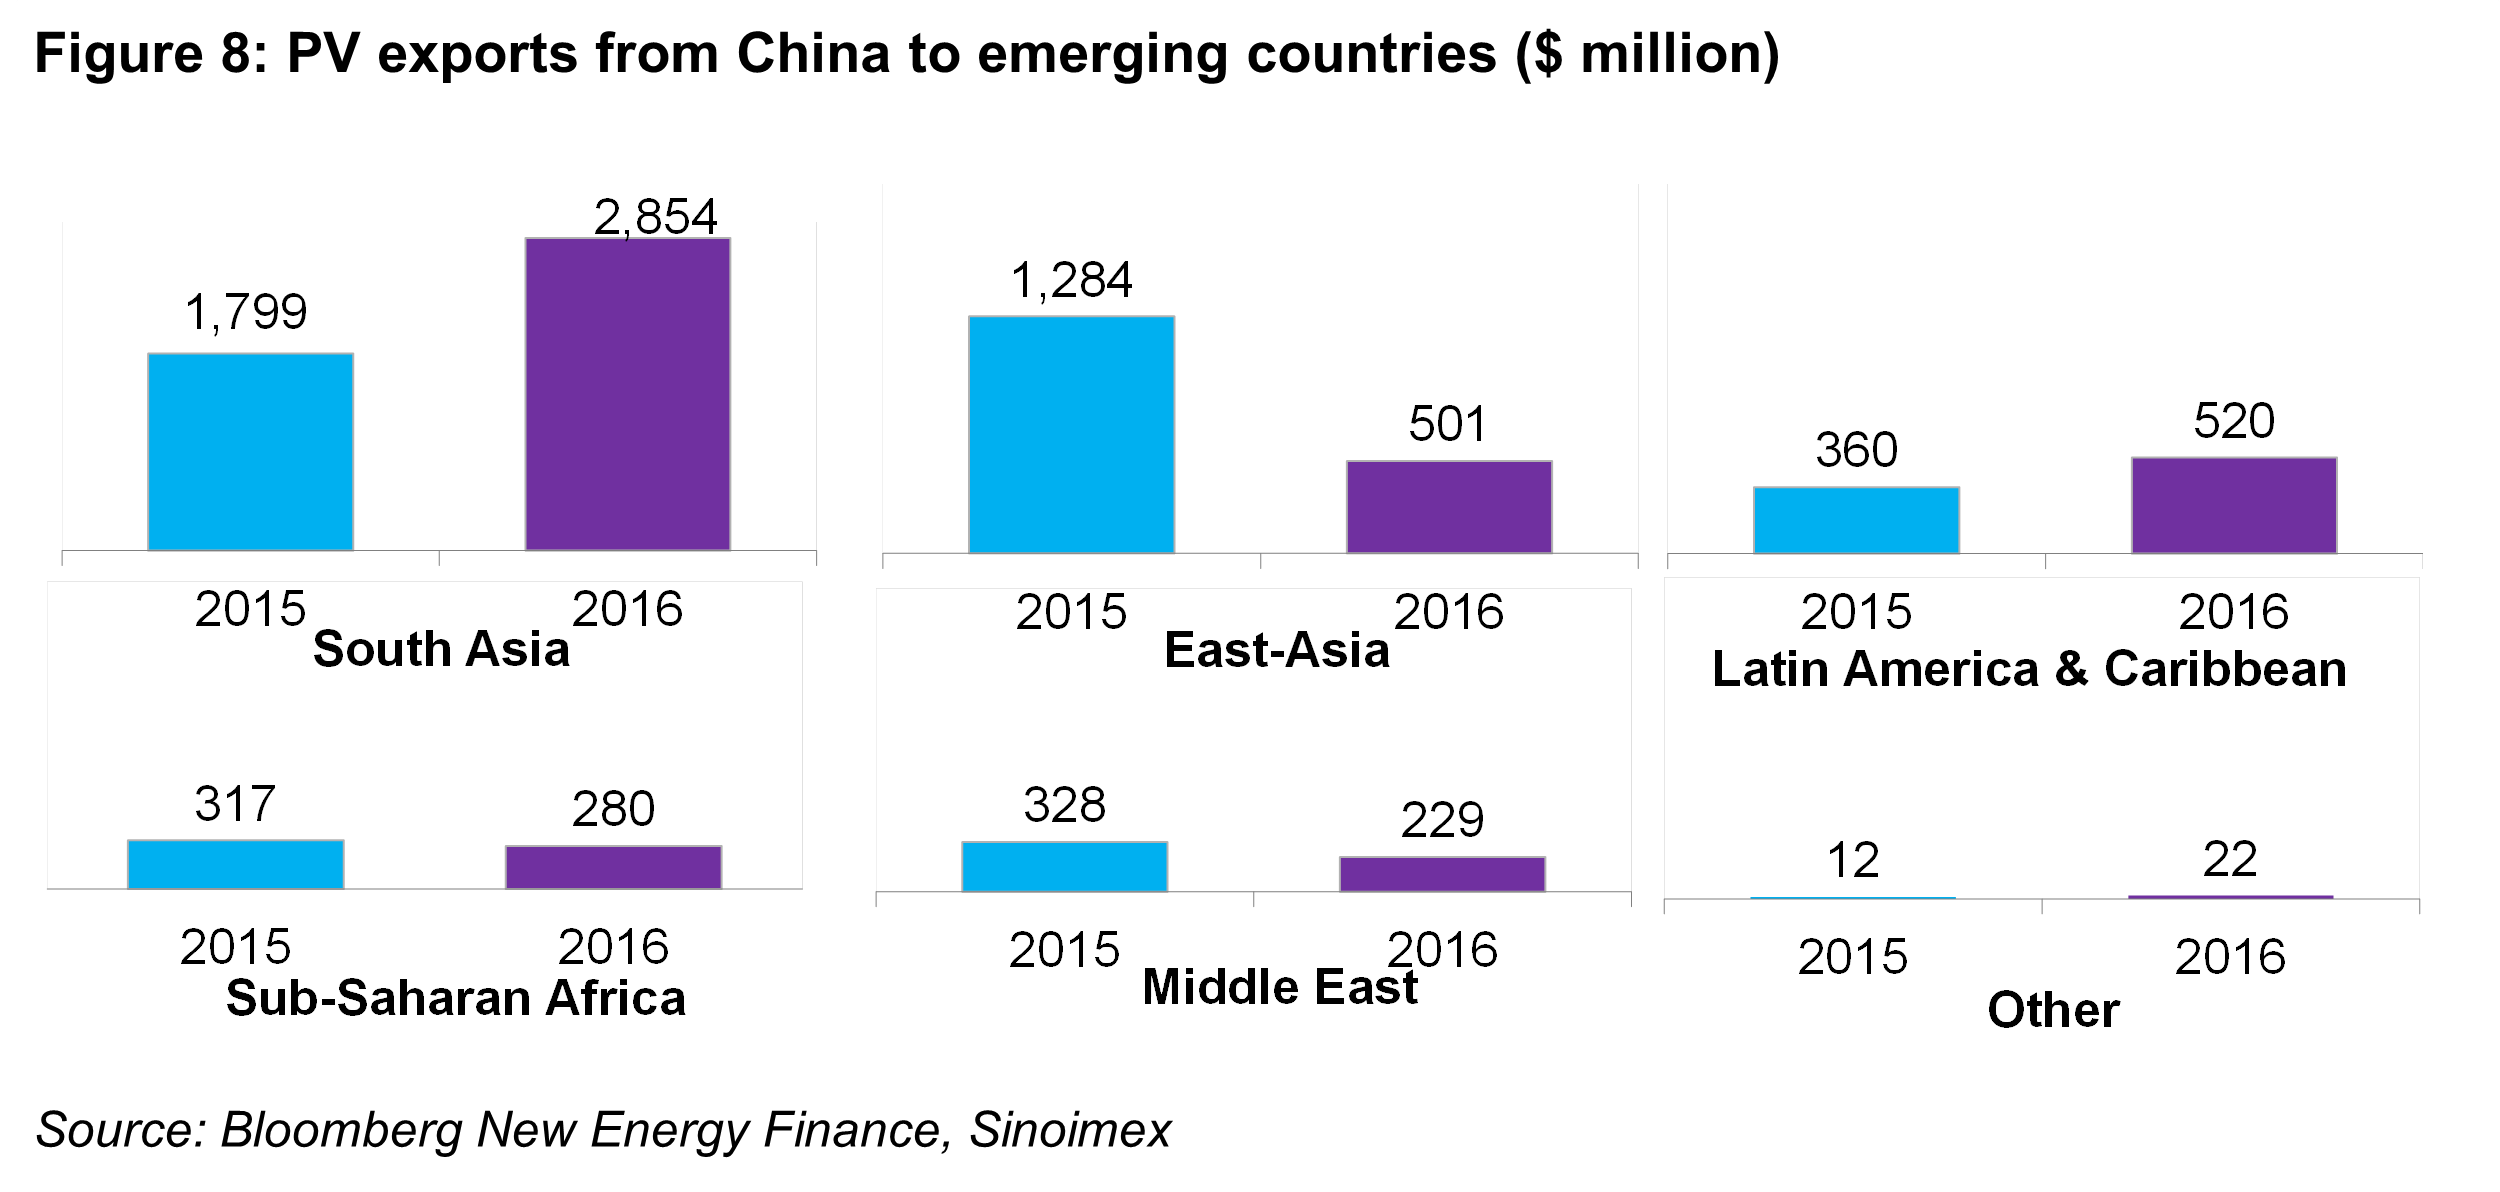 OG - Fig8 - PV exports from China to emerging countries